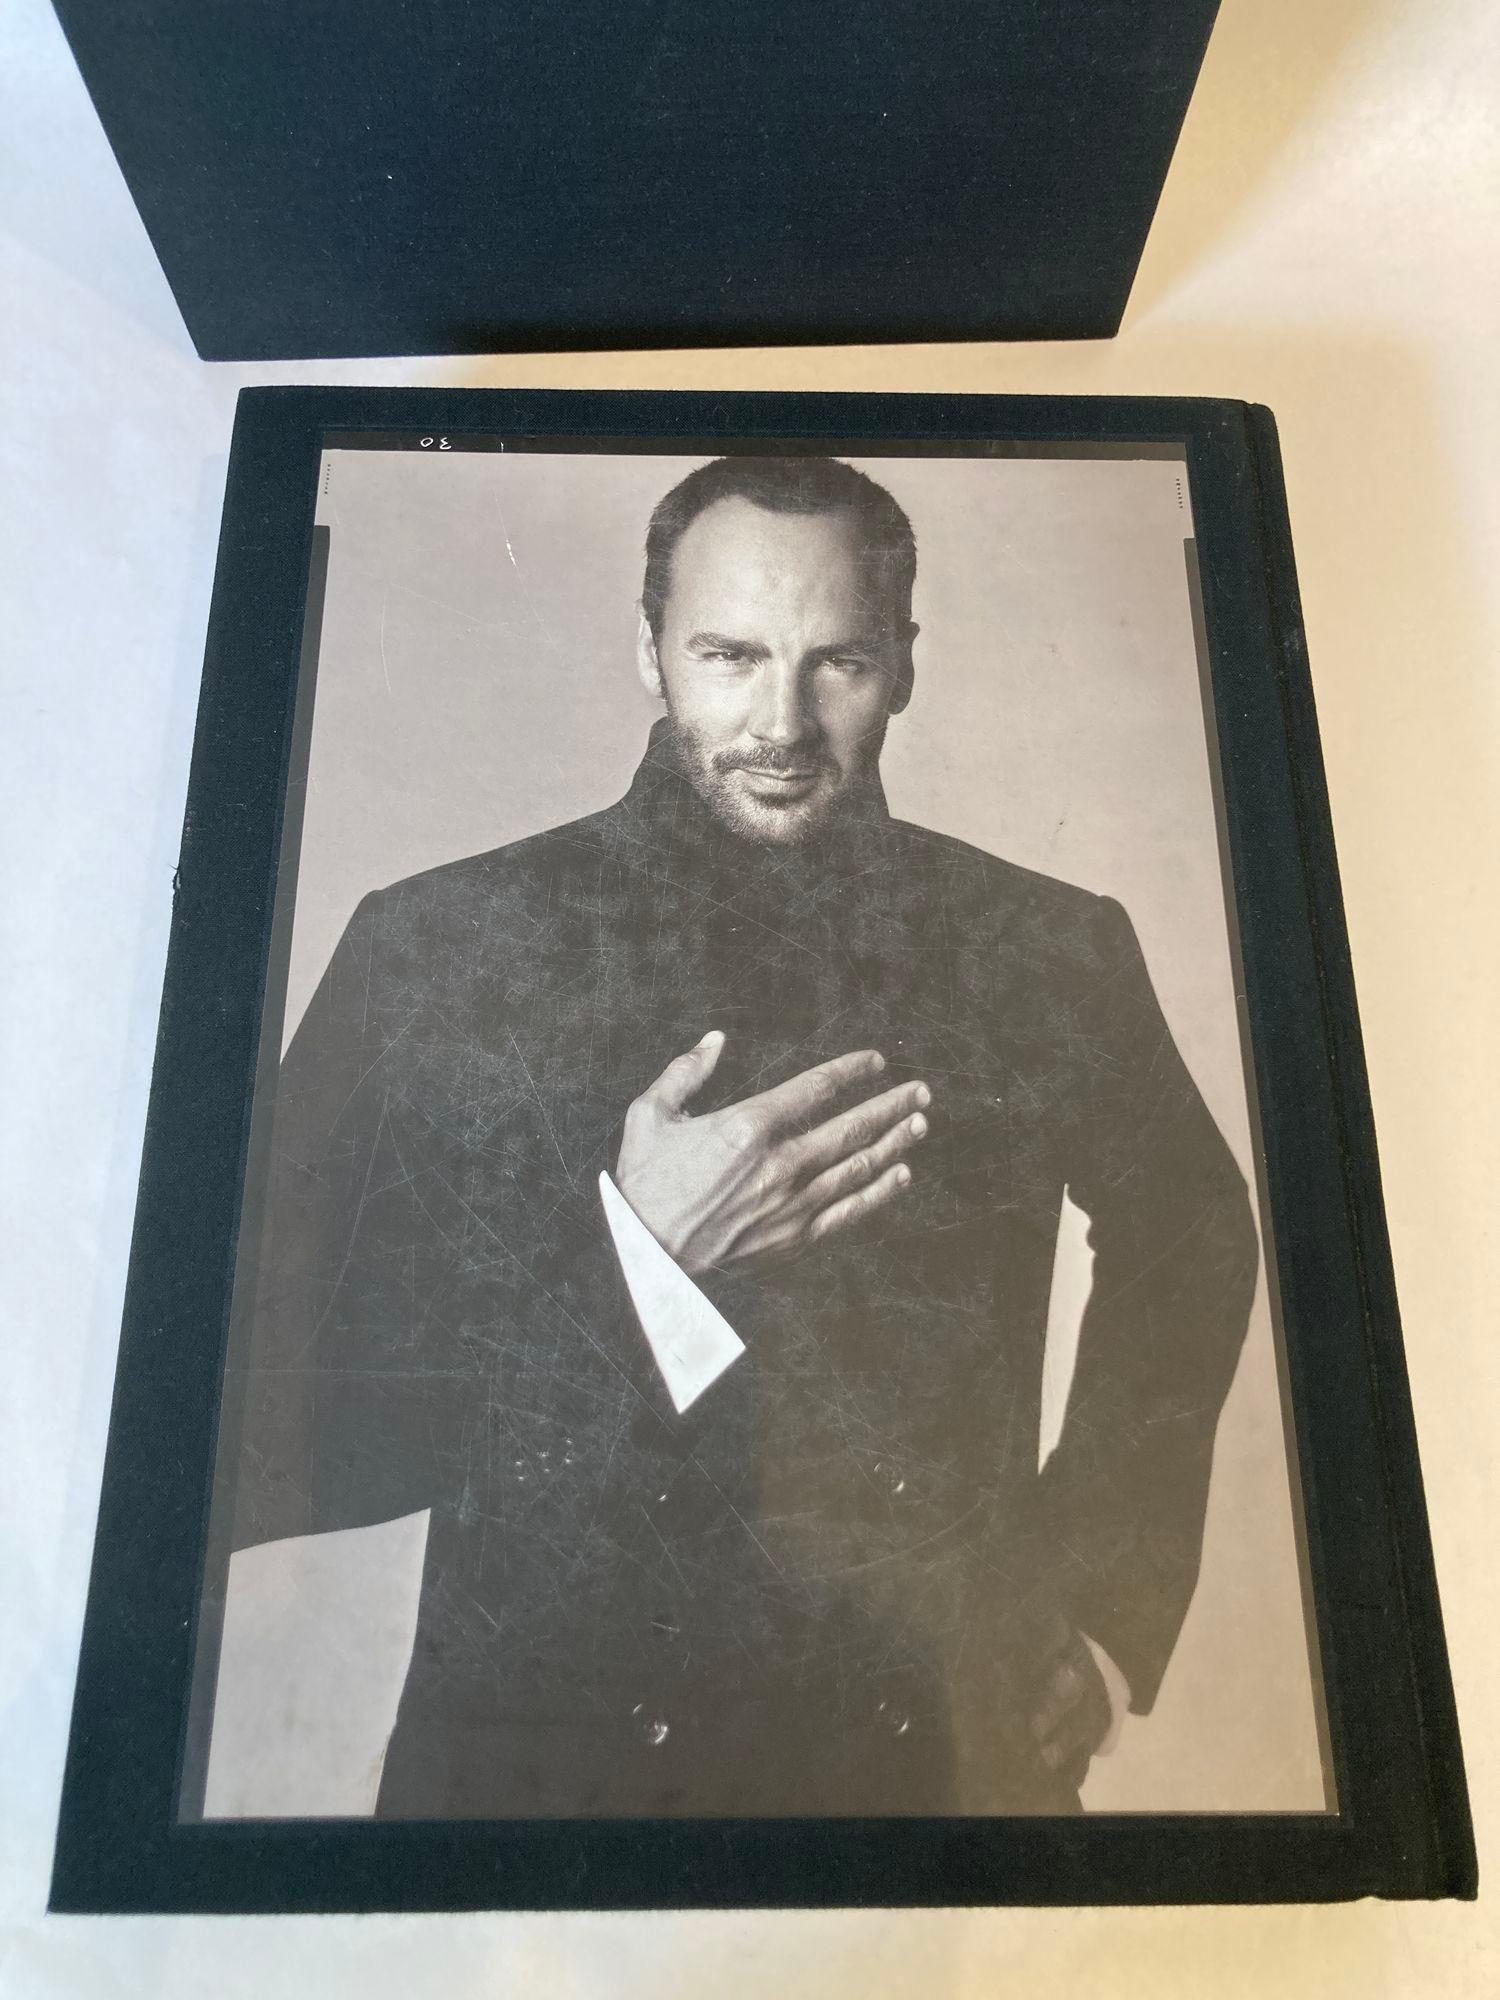 TOM FORD Oversized Coffee Table Book 2004 Rizzoli 7